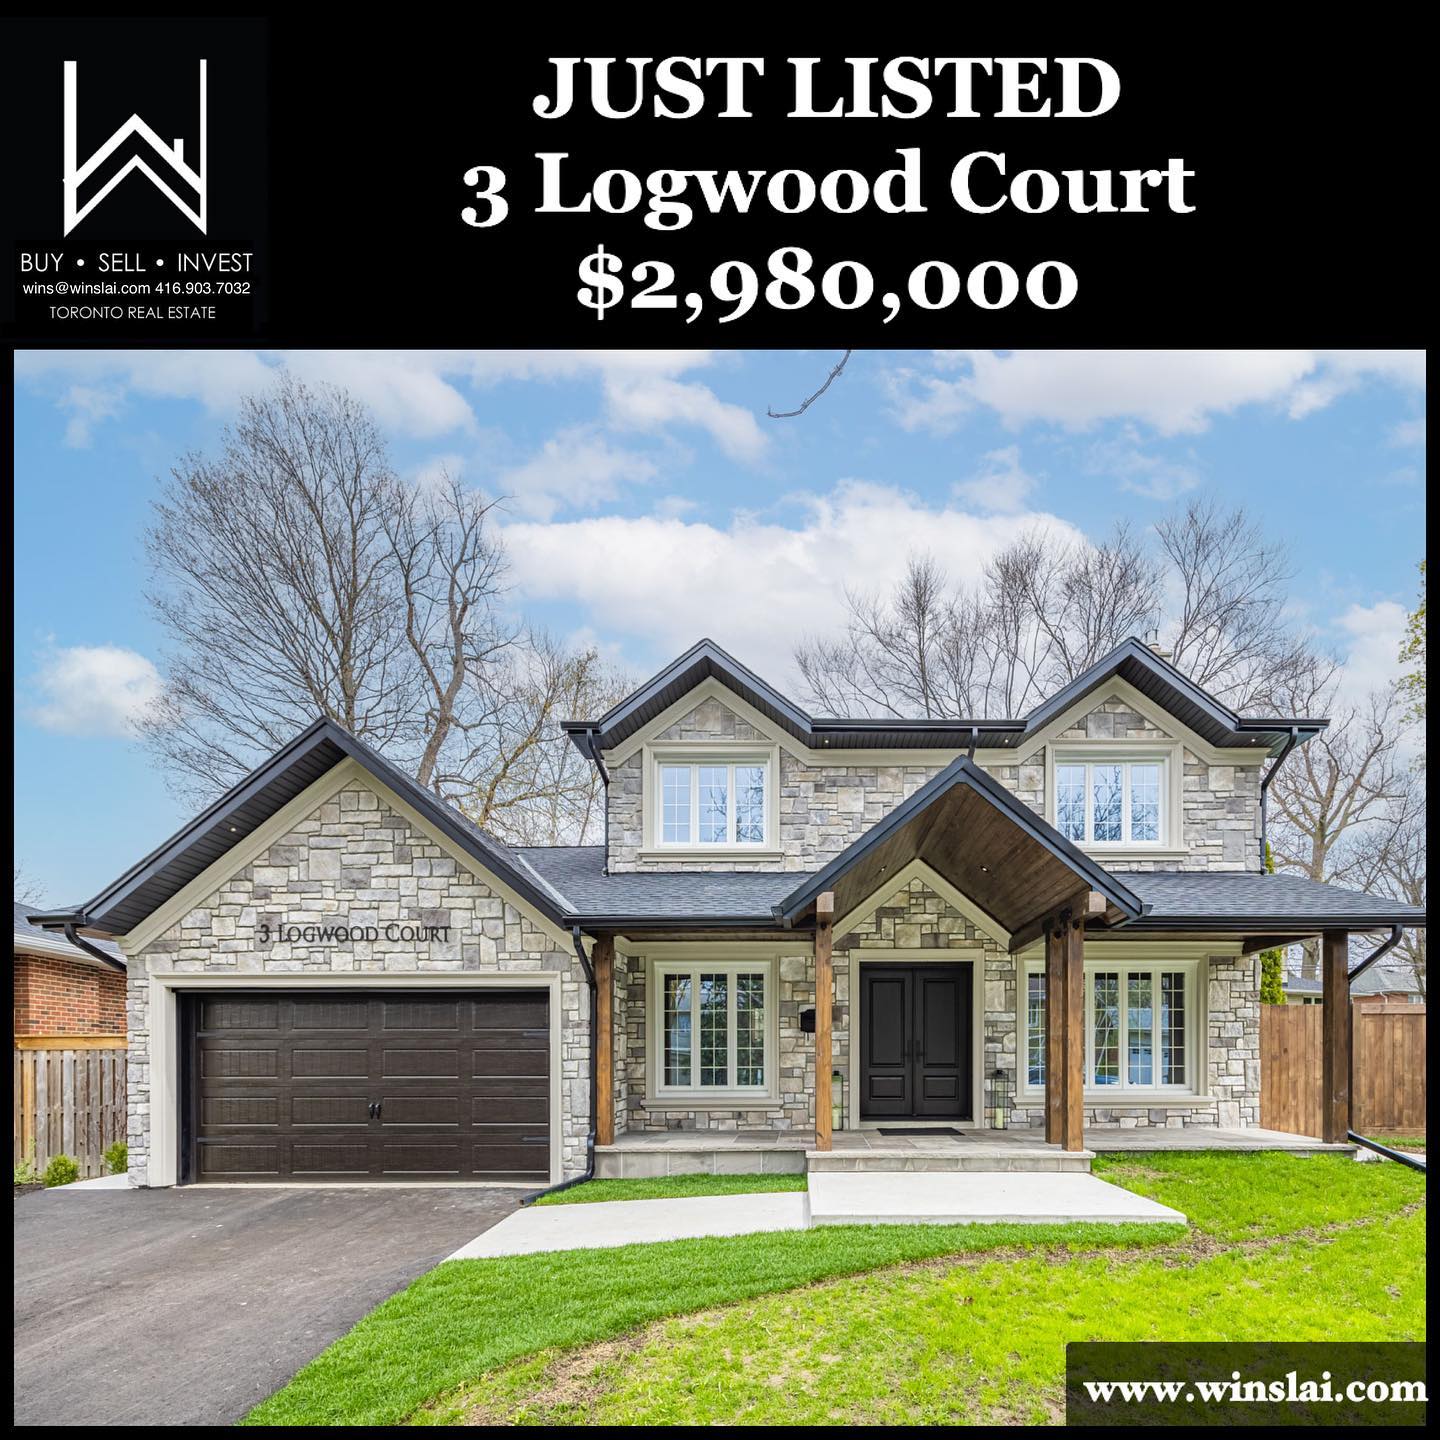 Just Listed flyer for luxurious detached house in Toronto.